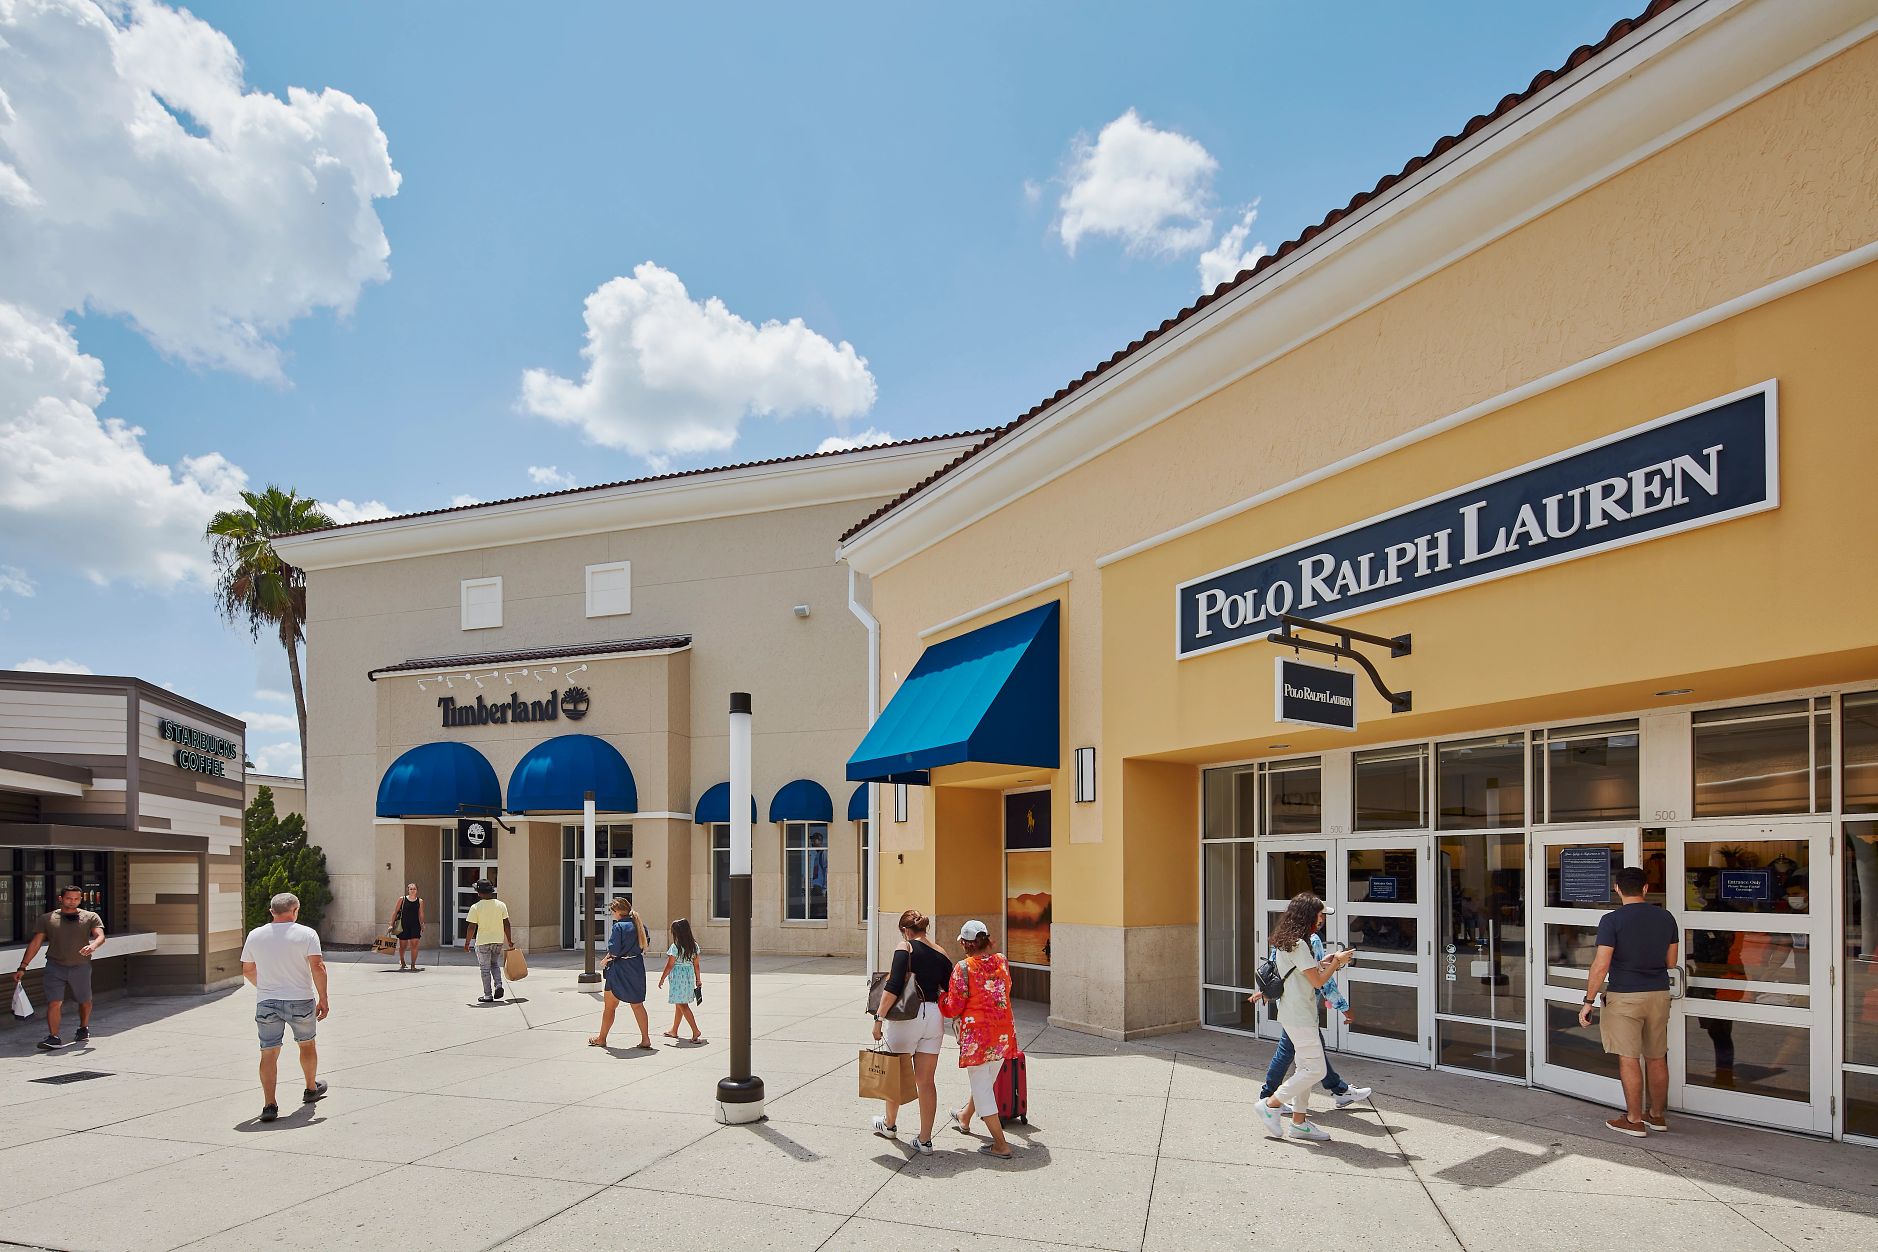 Store Directory for Orlando Vineland Premium Outlets® - A Shopping